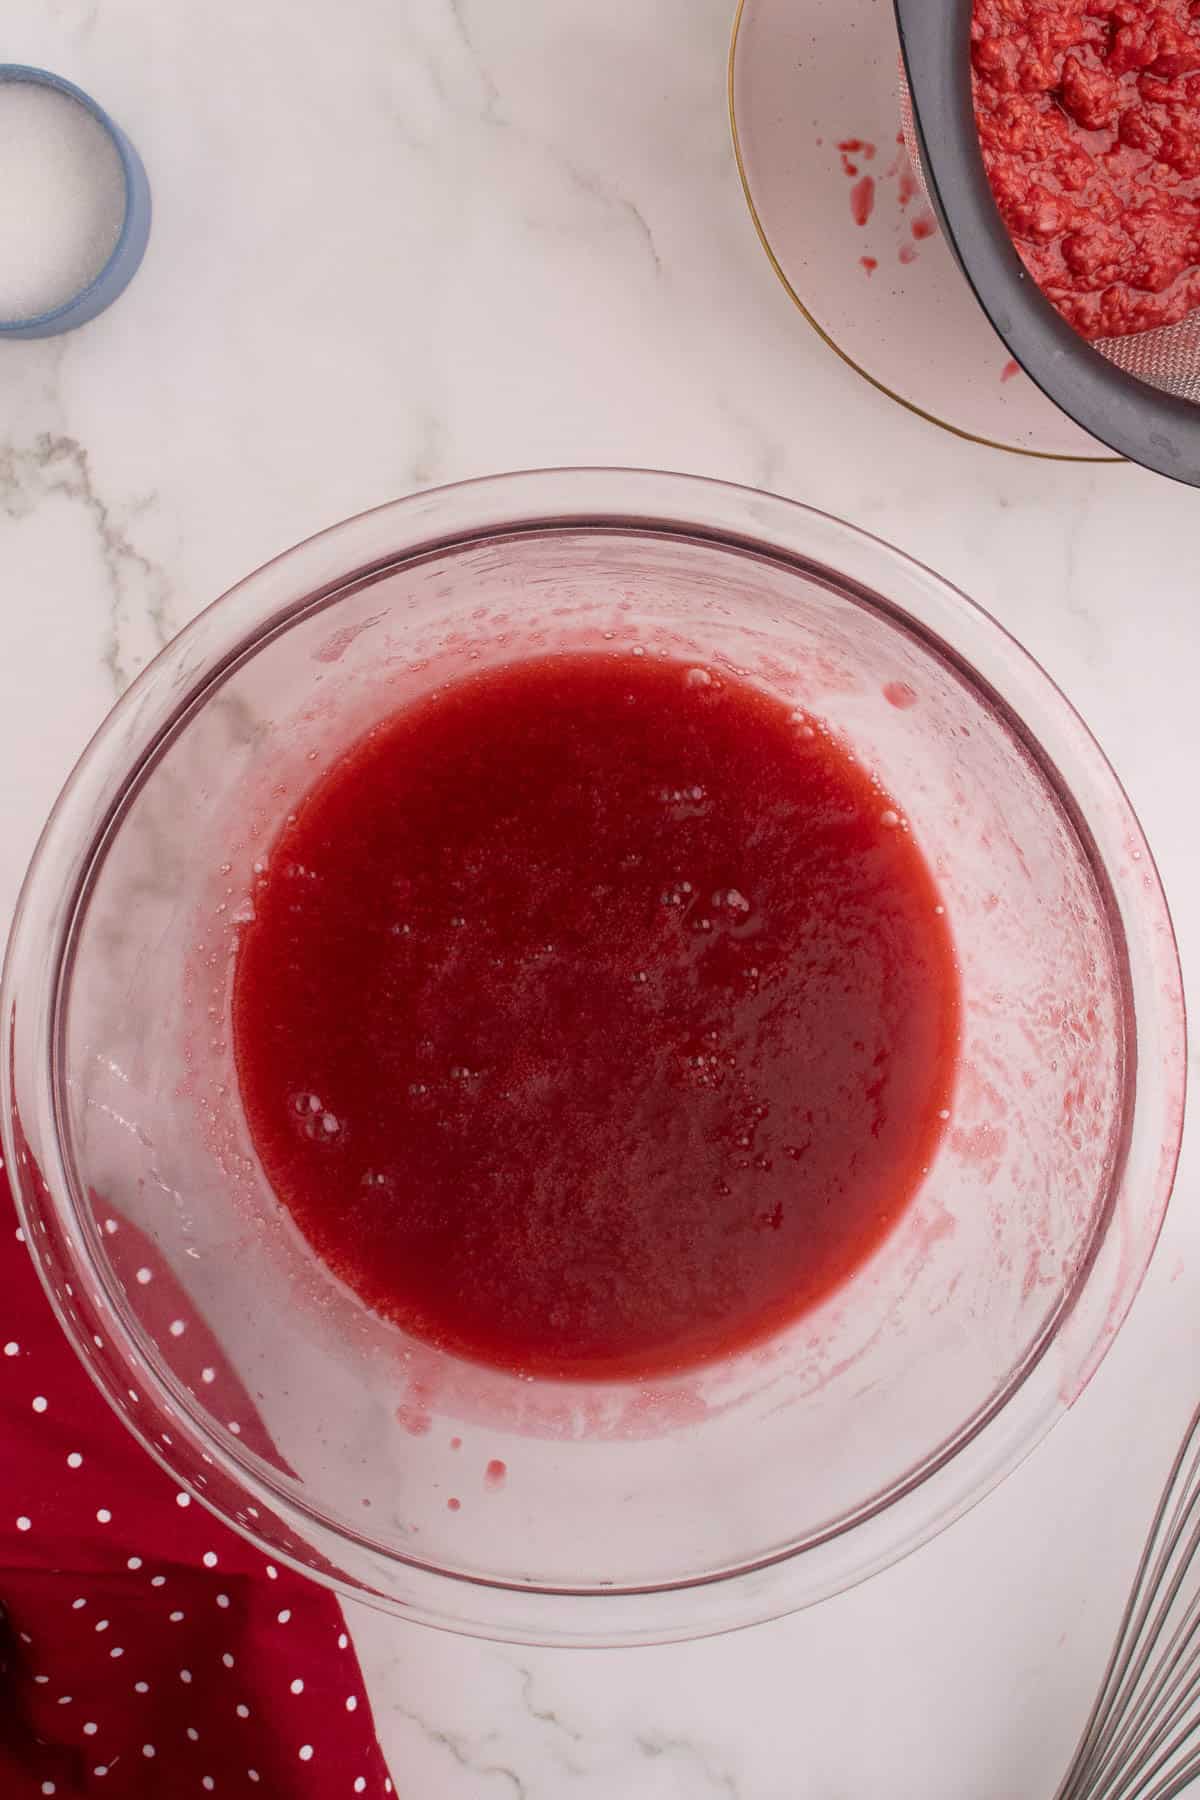 Strained raspberry sauce in a bowl.